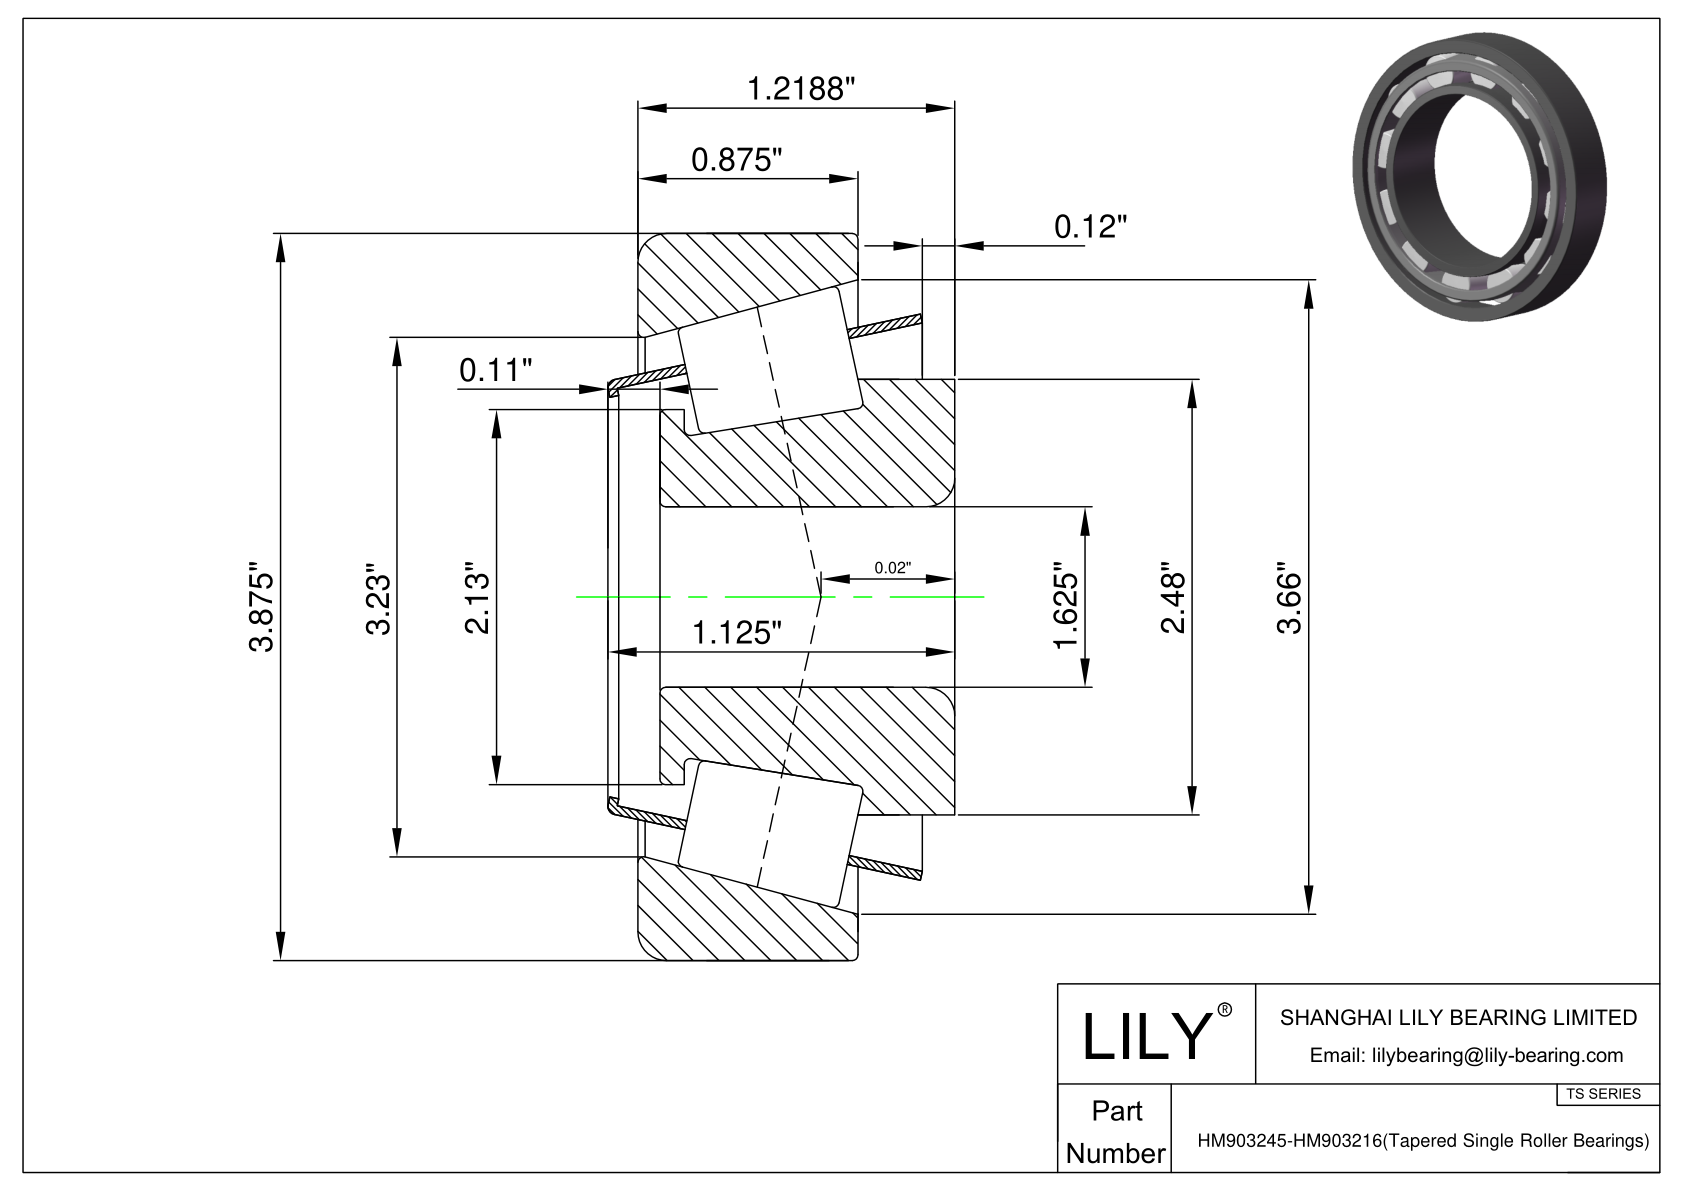 HM903245-HM903216 TS (Tapered Single Roller Bearings) (Imperial) cad drawing